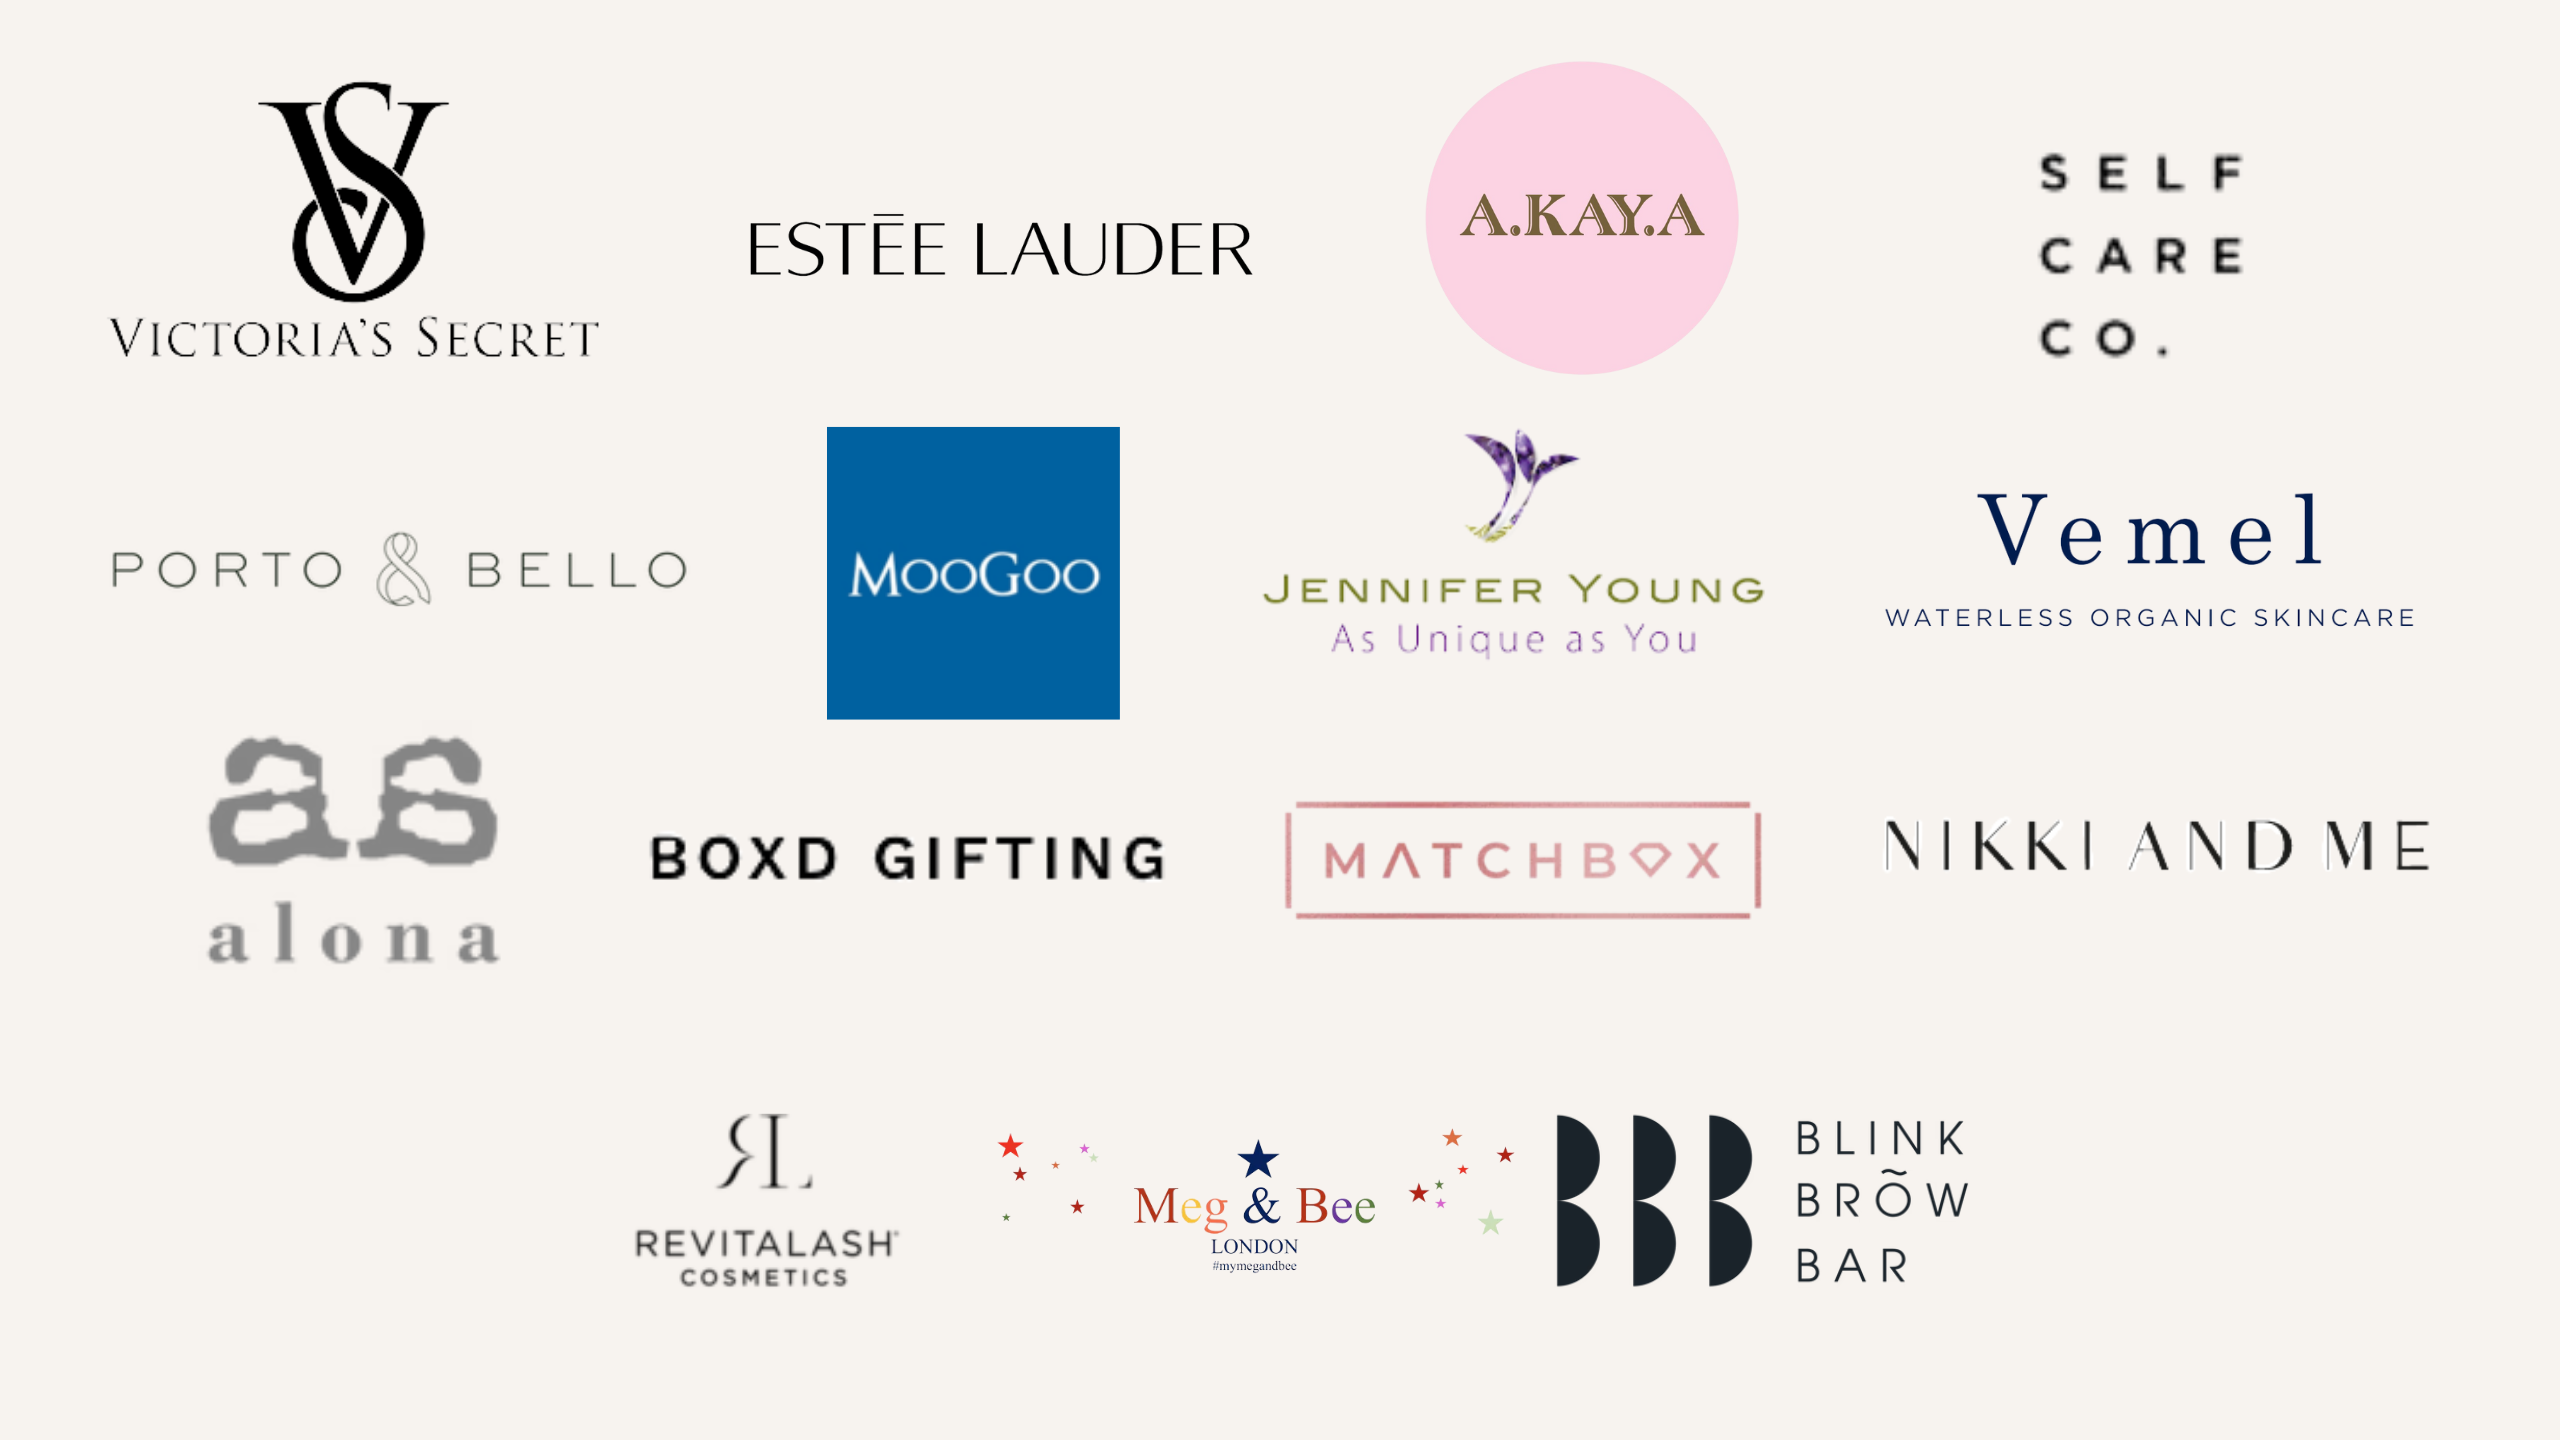 Brands attending the Pink Christmas shopping event include Victoria secret, estee lauder,porto and bello, self care co and more.